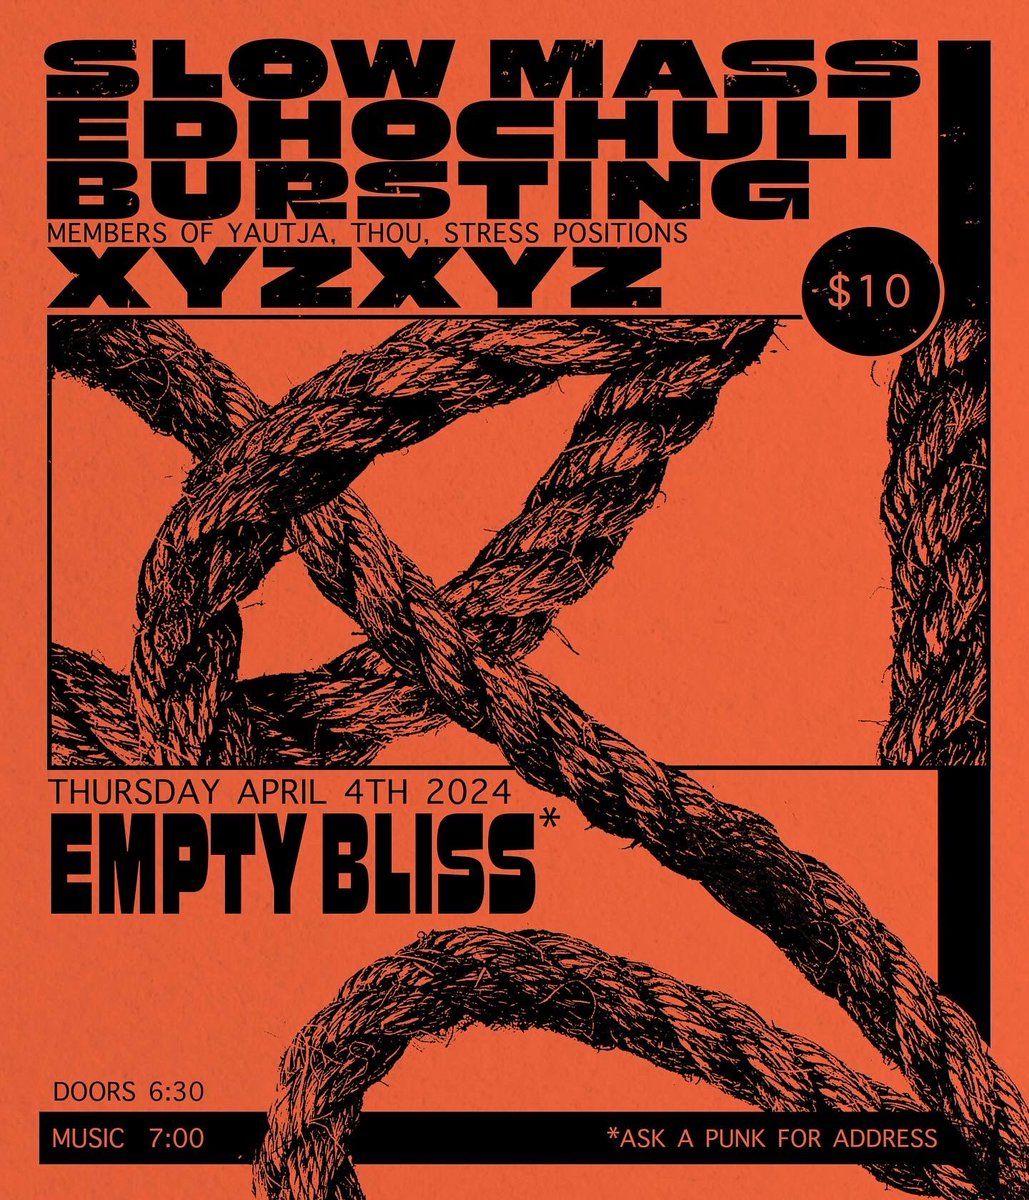 Next Chicago show. No other local shows planned after this. Empty Bliss w/ Edhochuli, Bursting (first show!) and @xyzxyzband. 7pm/$10 Flyer by Karen Mooney